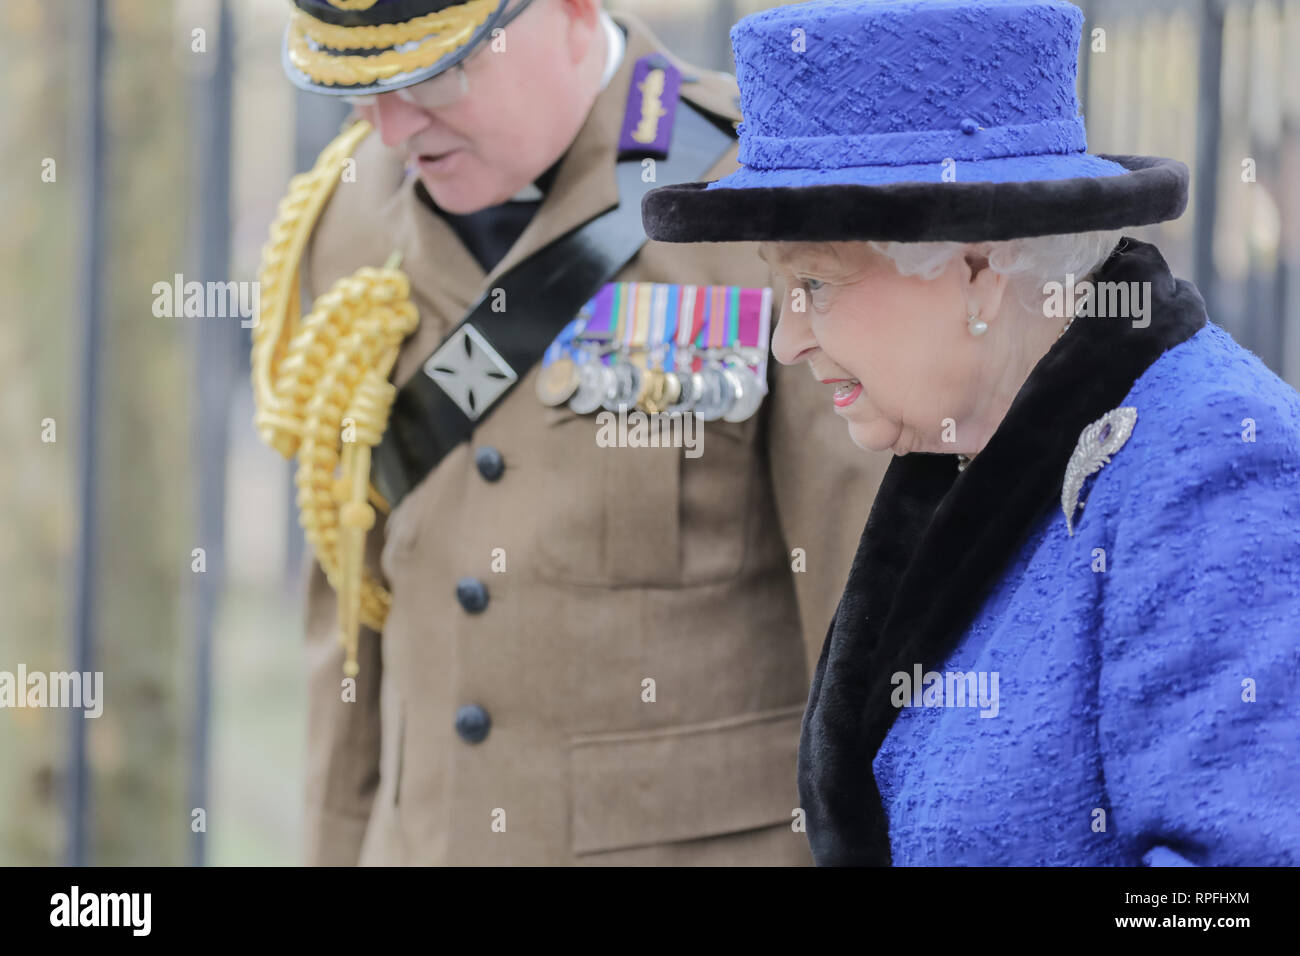 Wellington Barracks, London, UK. 22nd Feb, 2019. Her Majesty The Queen, Patron of The Royal Army Chaplains’ Department, attending a service to celebrate the centenary of the granting by King George V of the prefix ‘Royal’ to the department, at The Guards’ Chapel, Wellington Barracks. Friday 22nd February, 2019. Credit: amanda rose/Alamy Live News Stock Photo